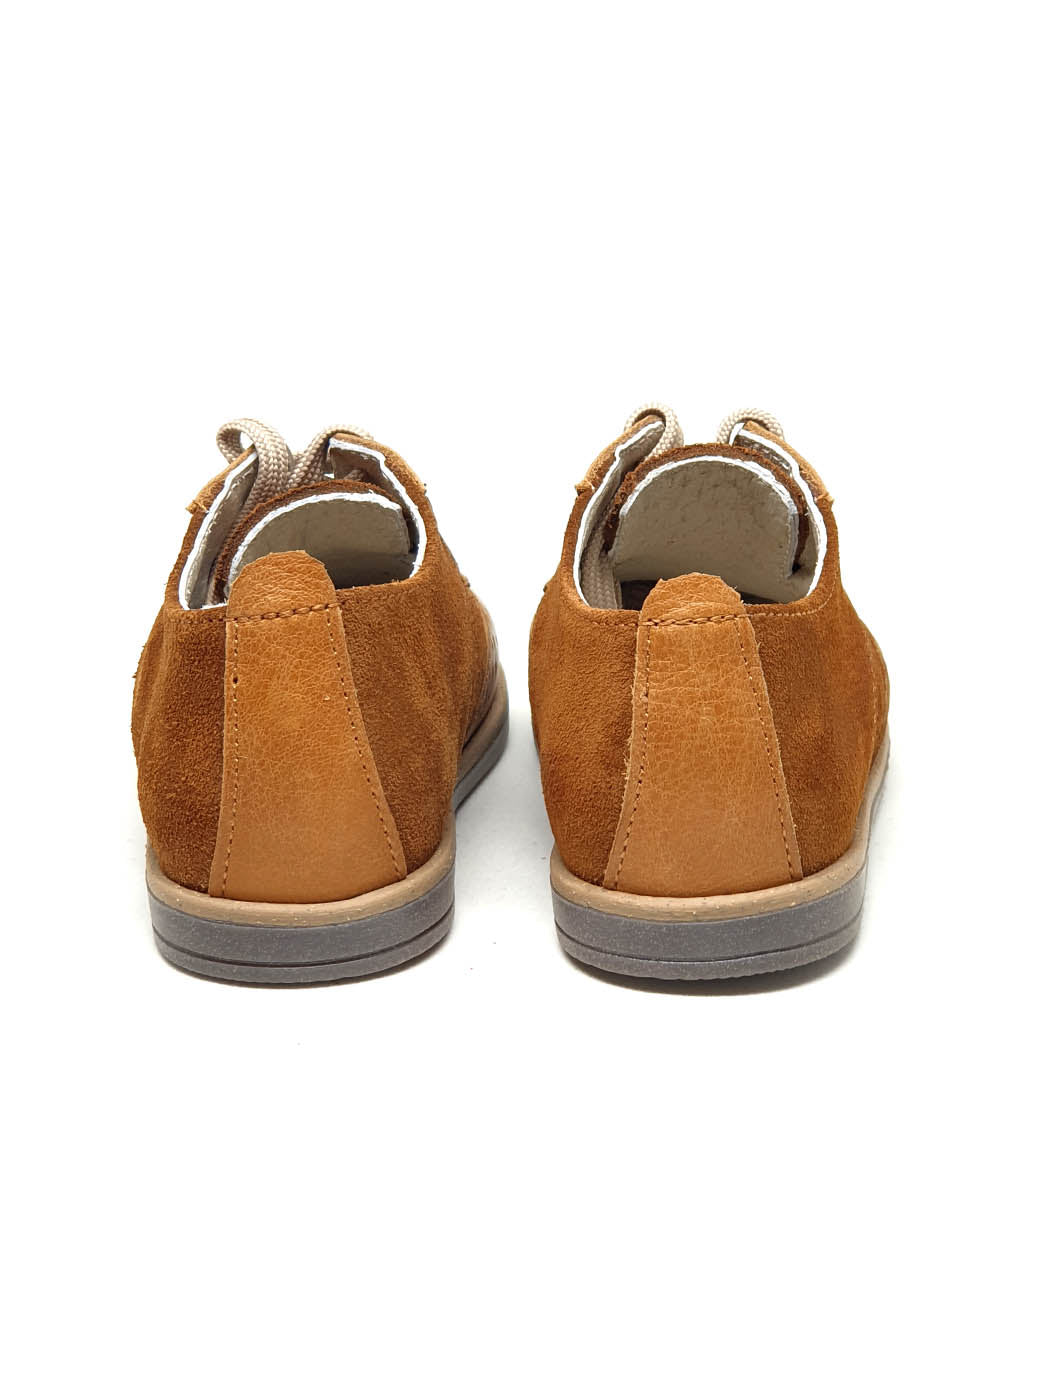 Baby Shoes Moccasins for boy - Camel